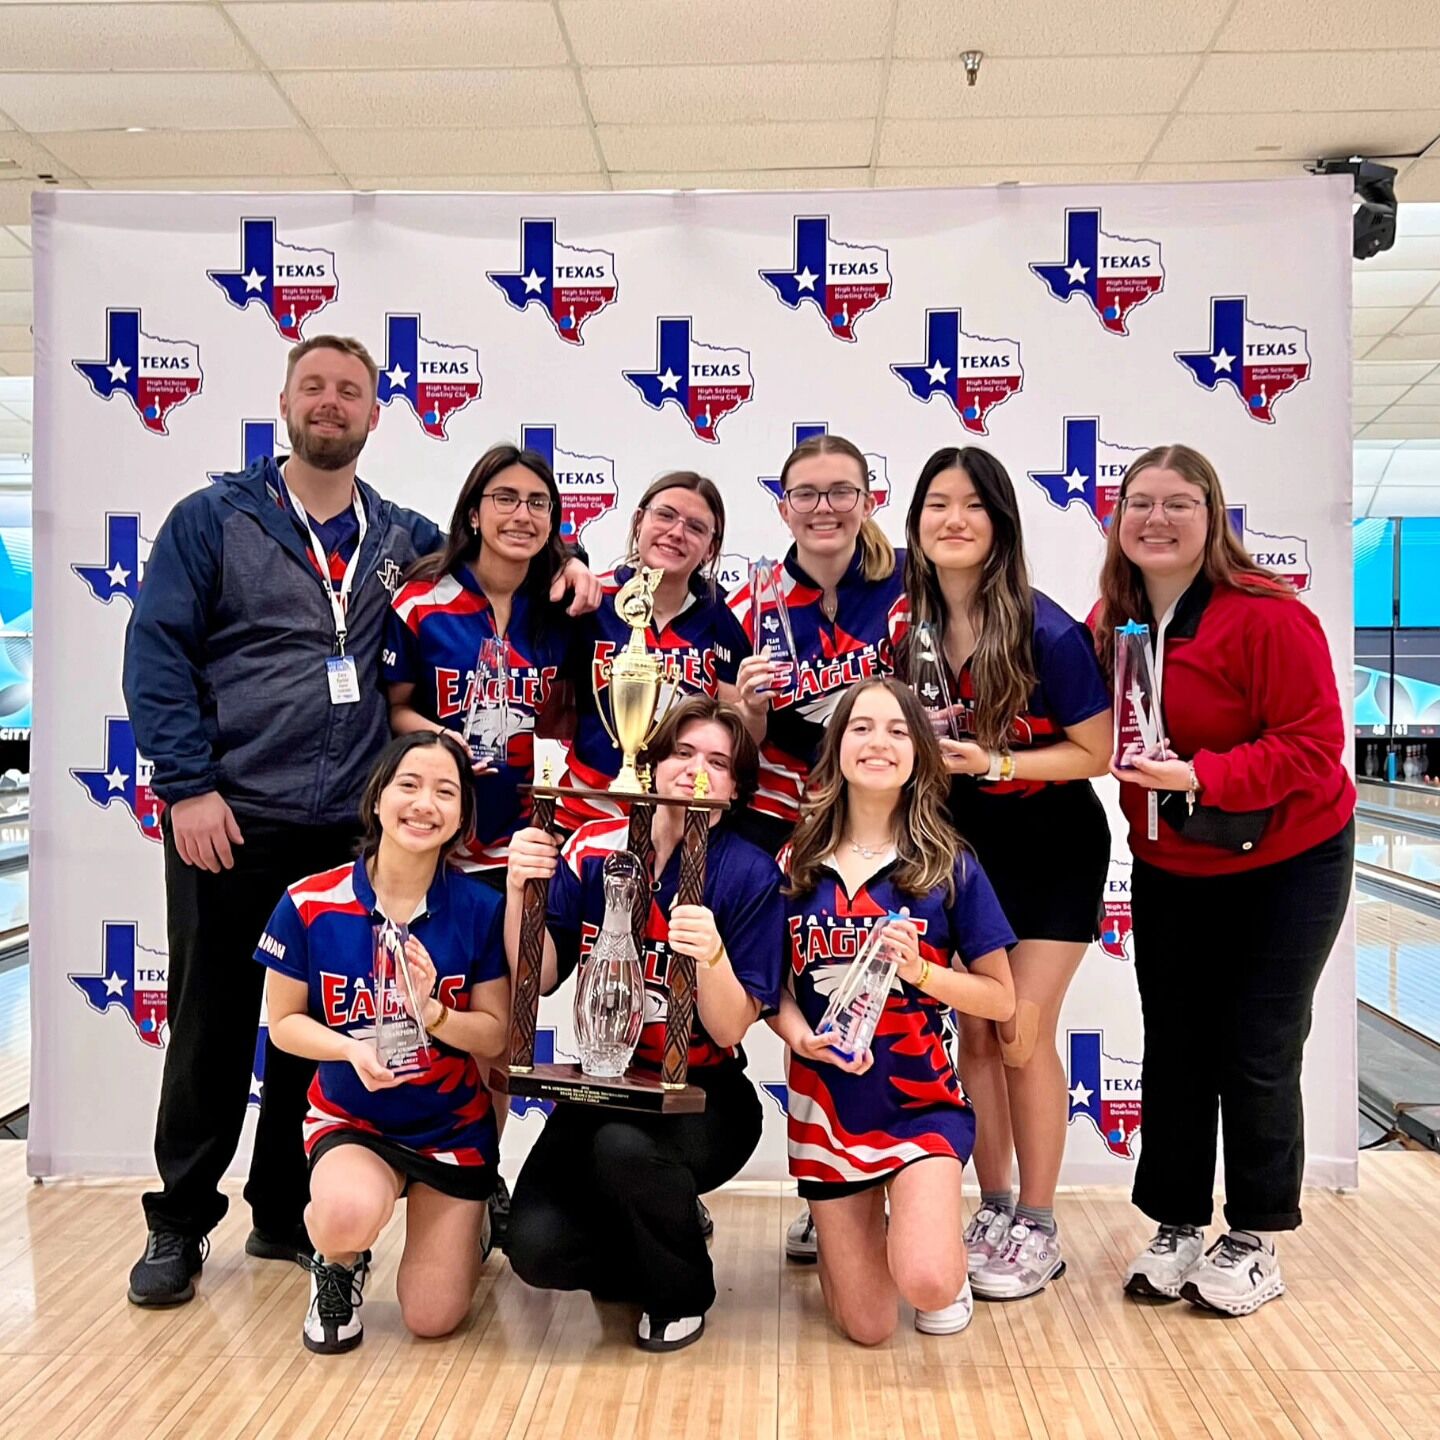 Full circle: Allen girls bowling team wins state title